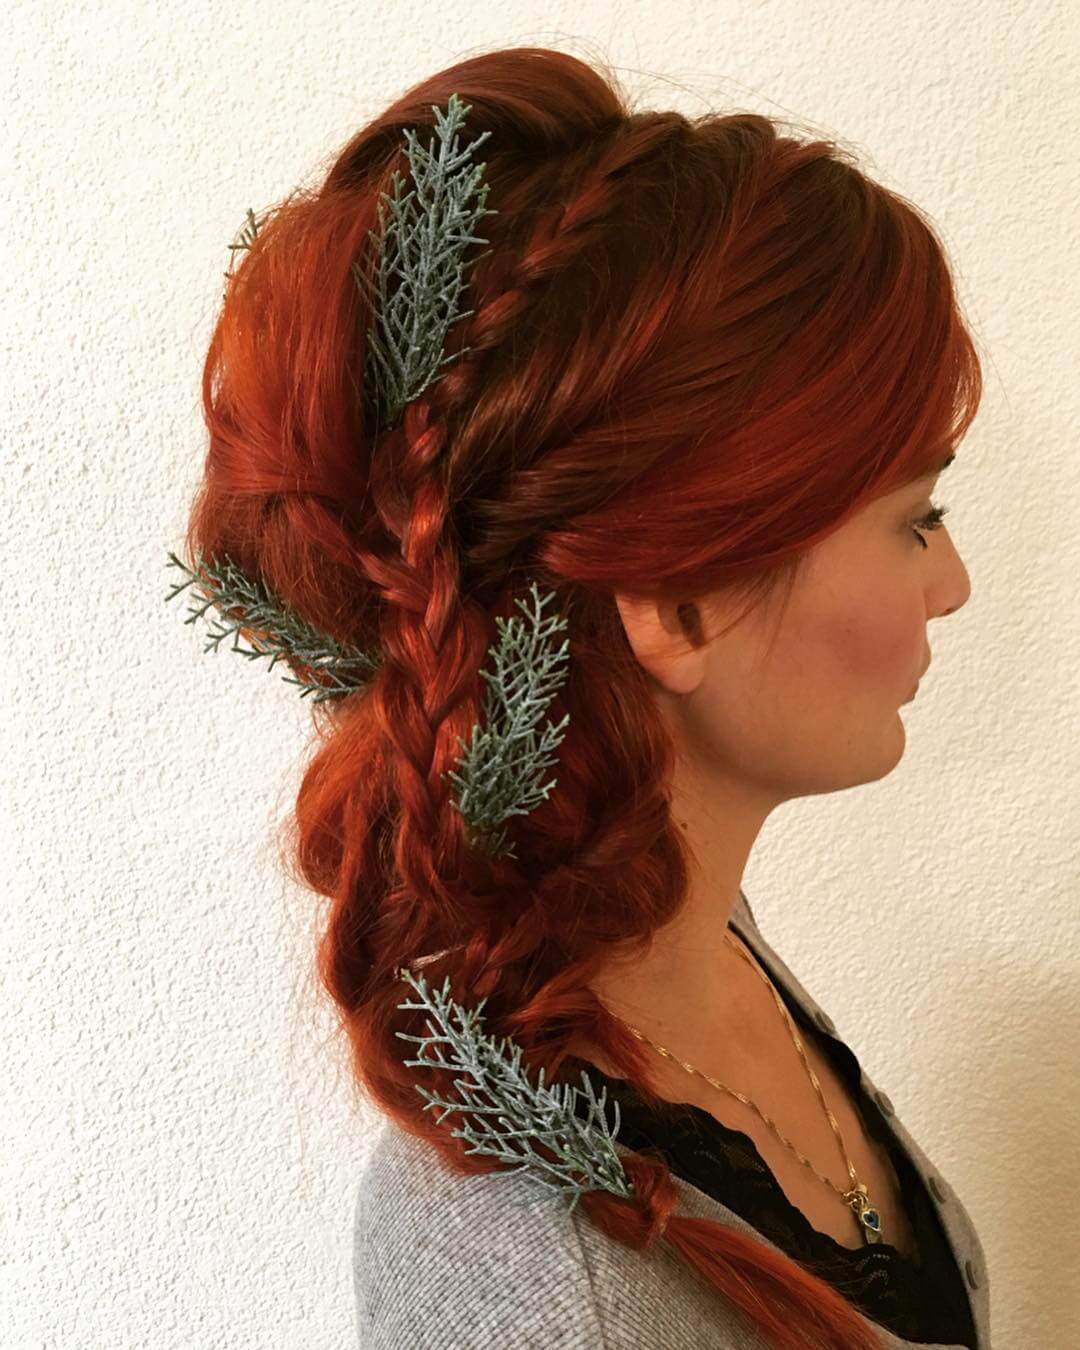 Christmas Hairs With Reindeer Horns - Red Hairs